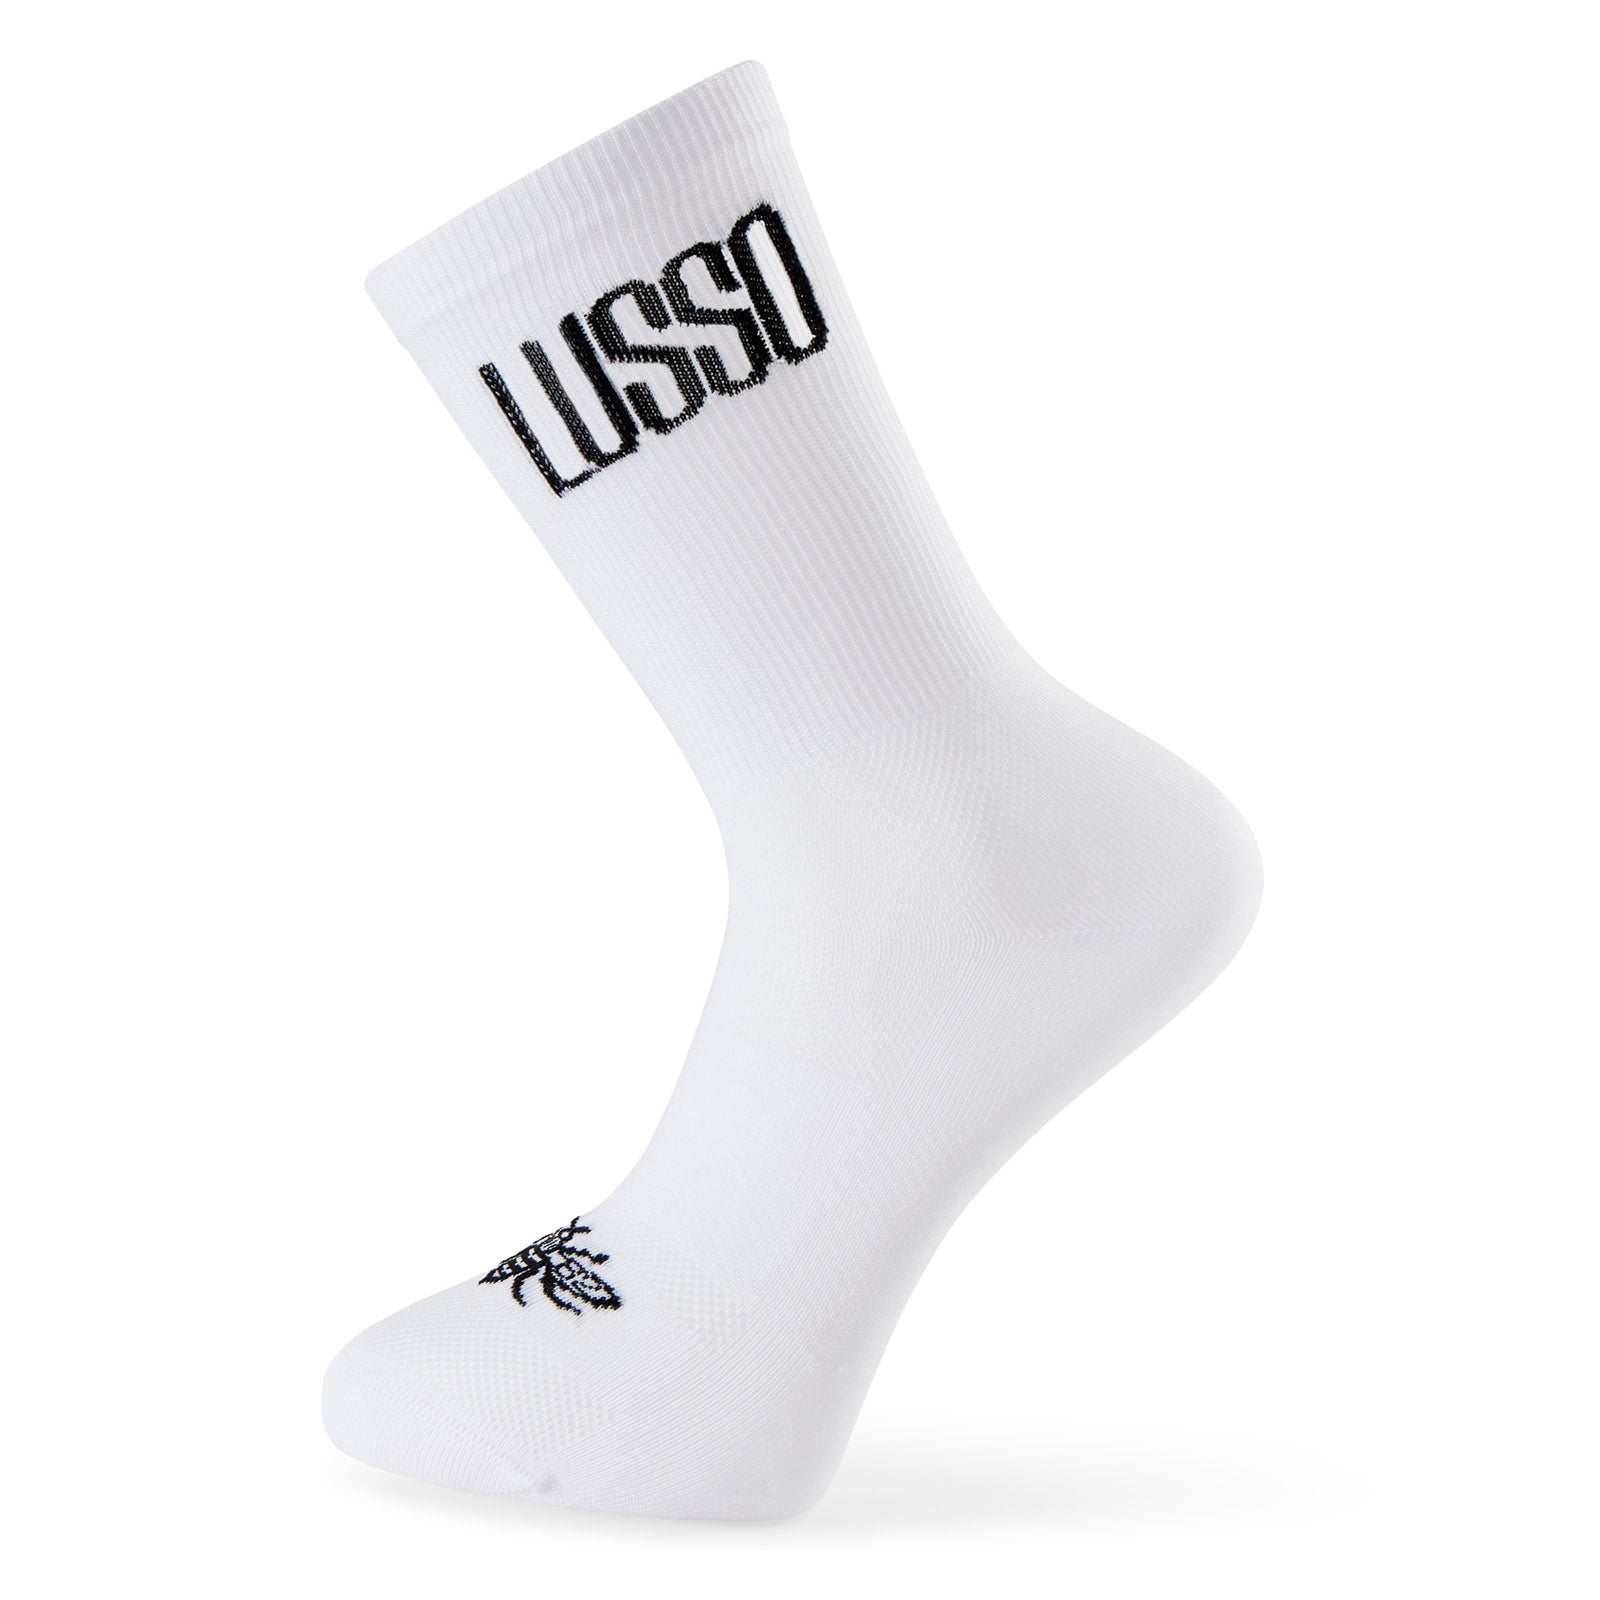 Paragon accessories bundle (white socks) - save 20% - Lusso Cycle Wear